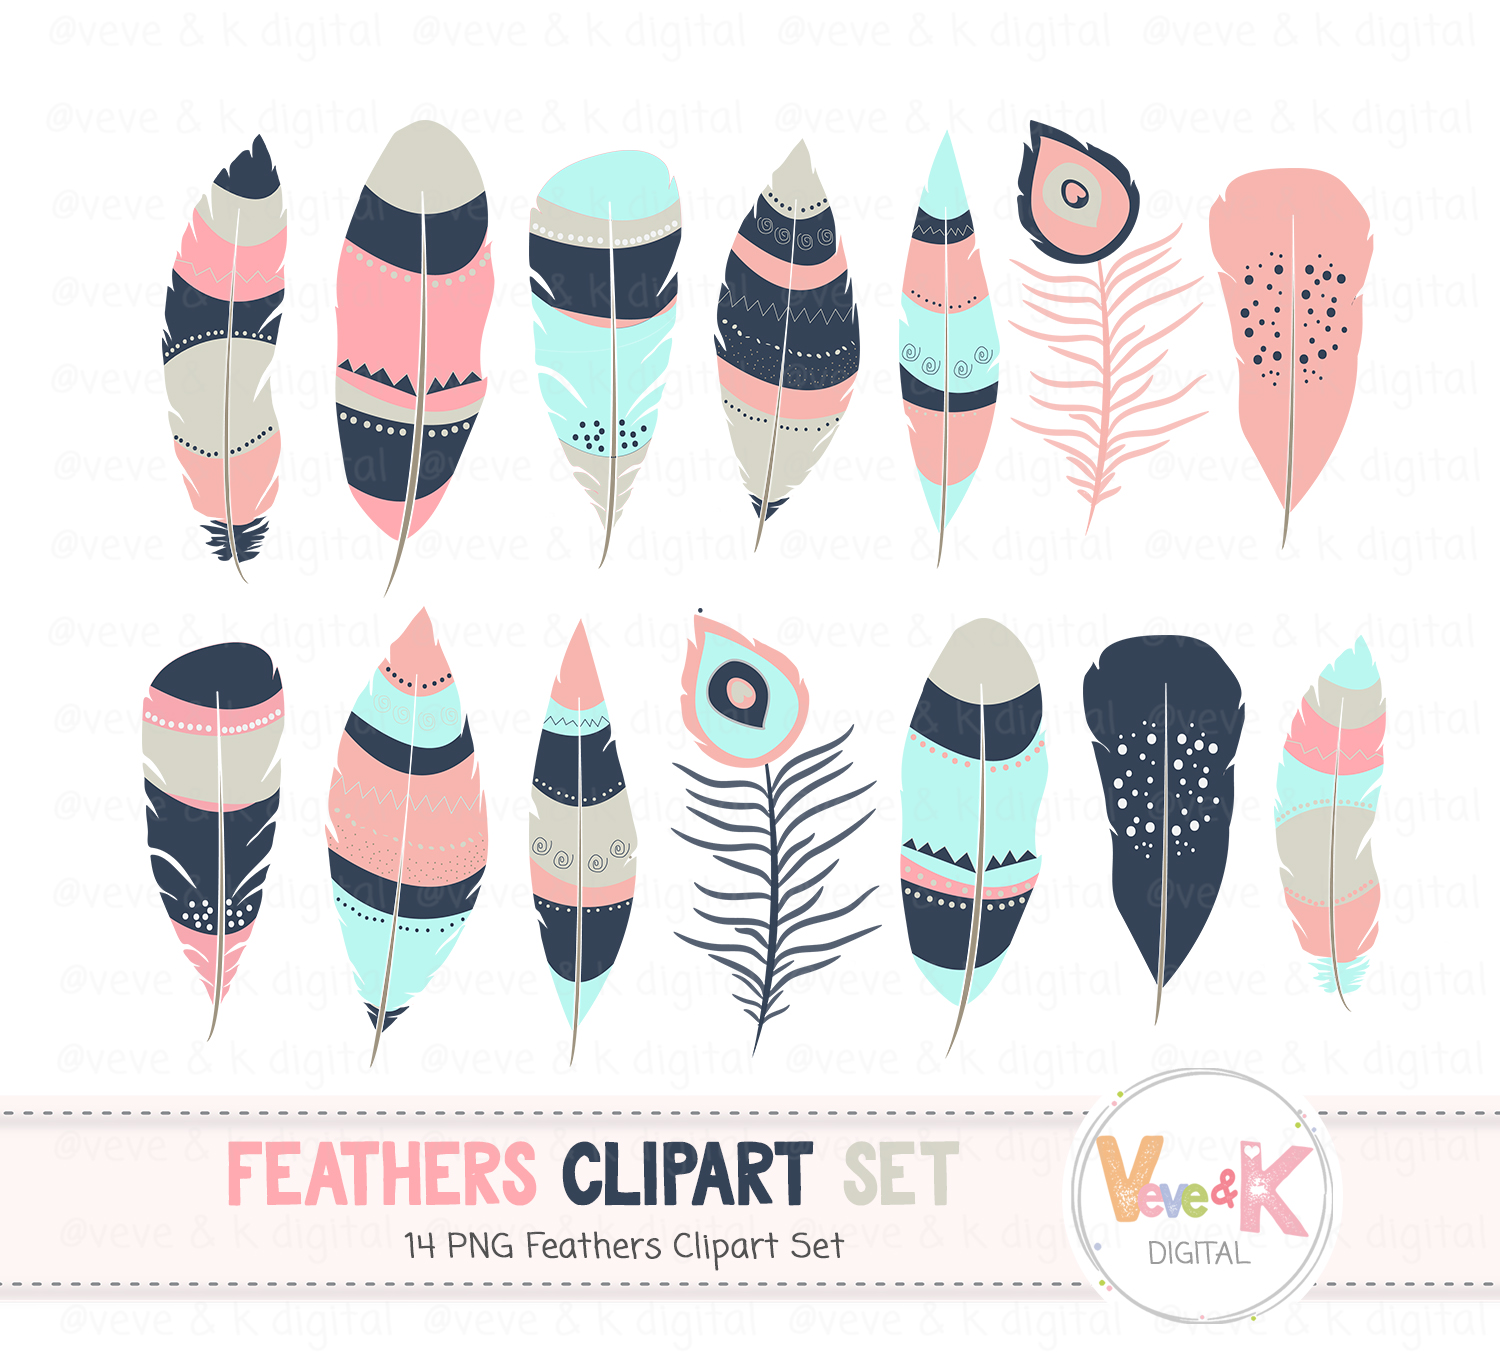 feathers clipart tribal